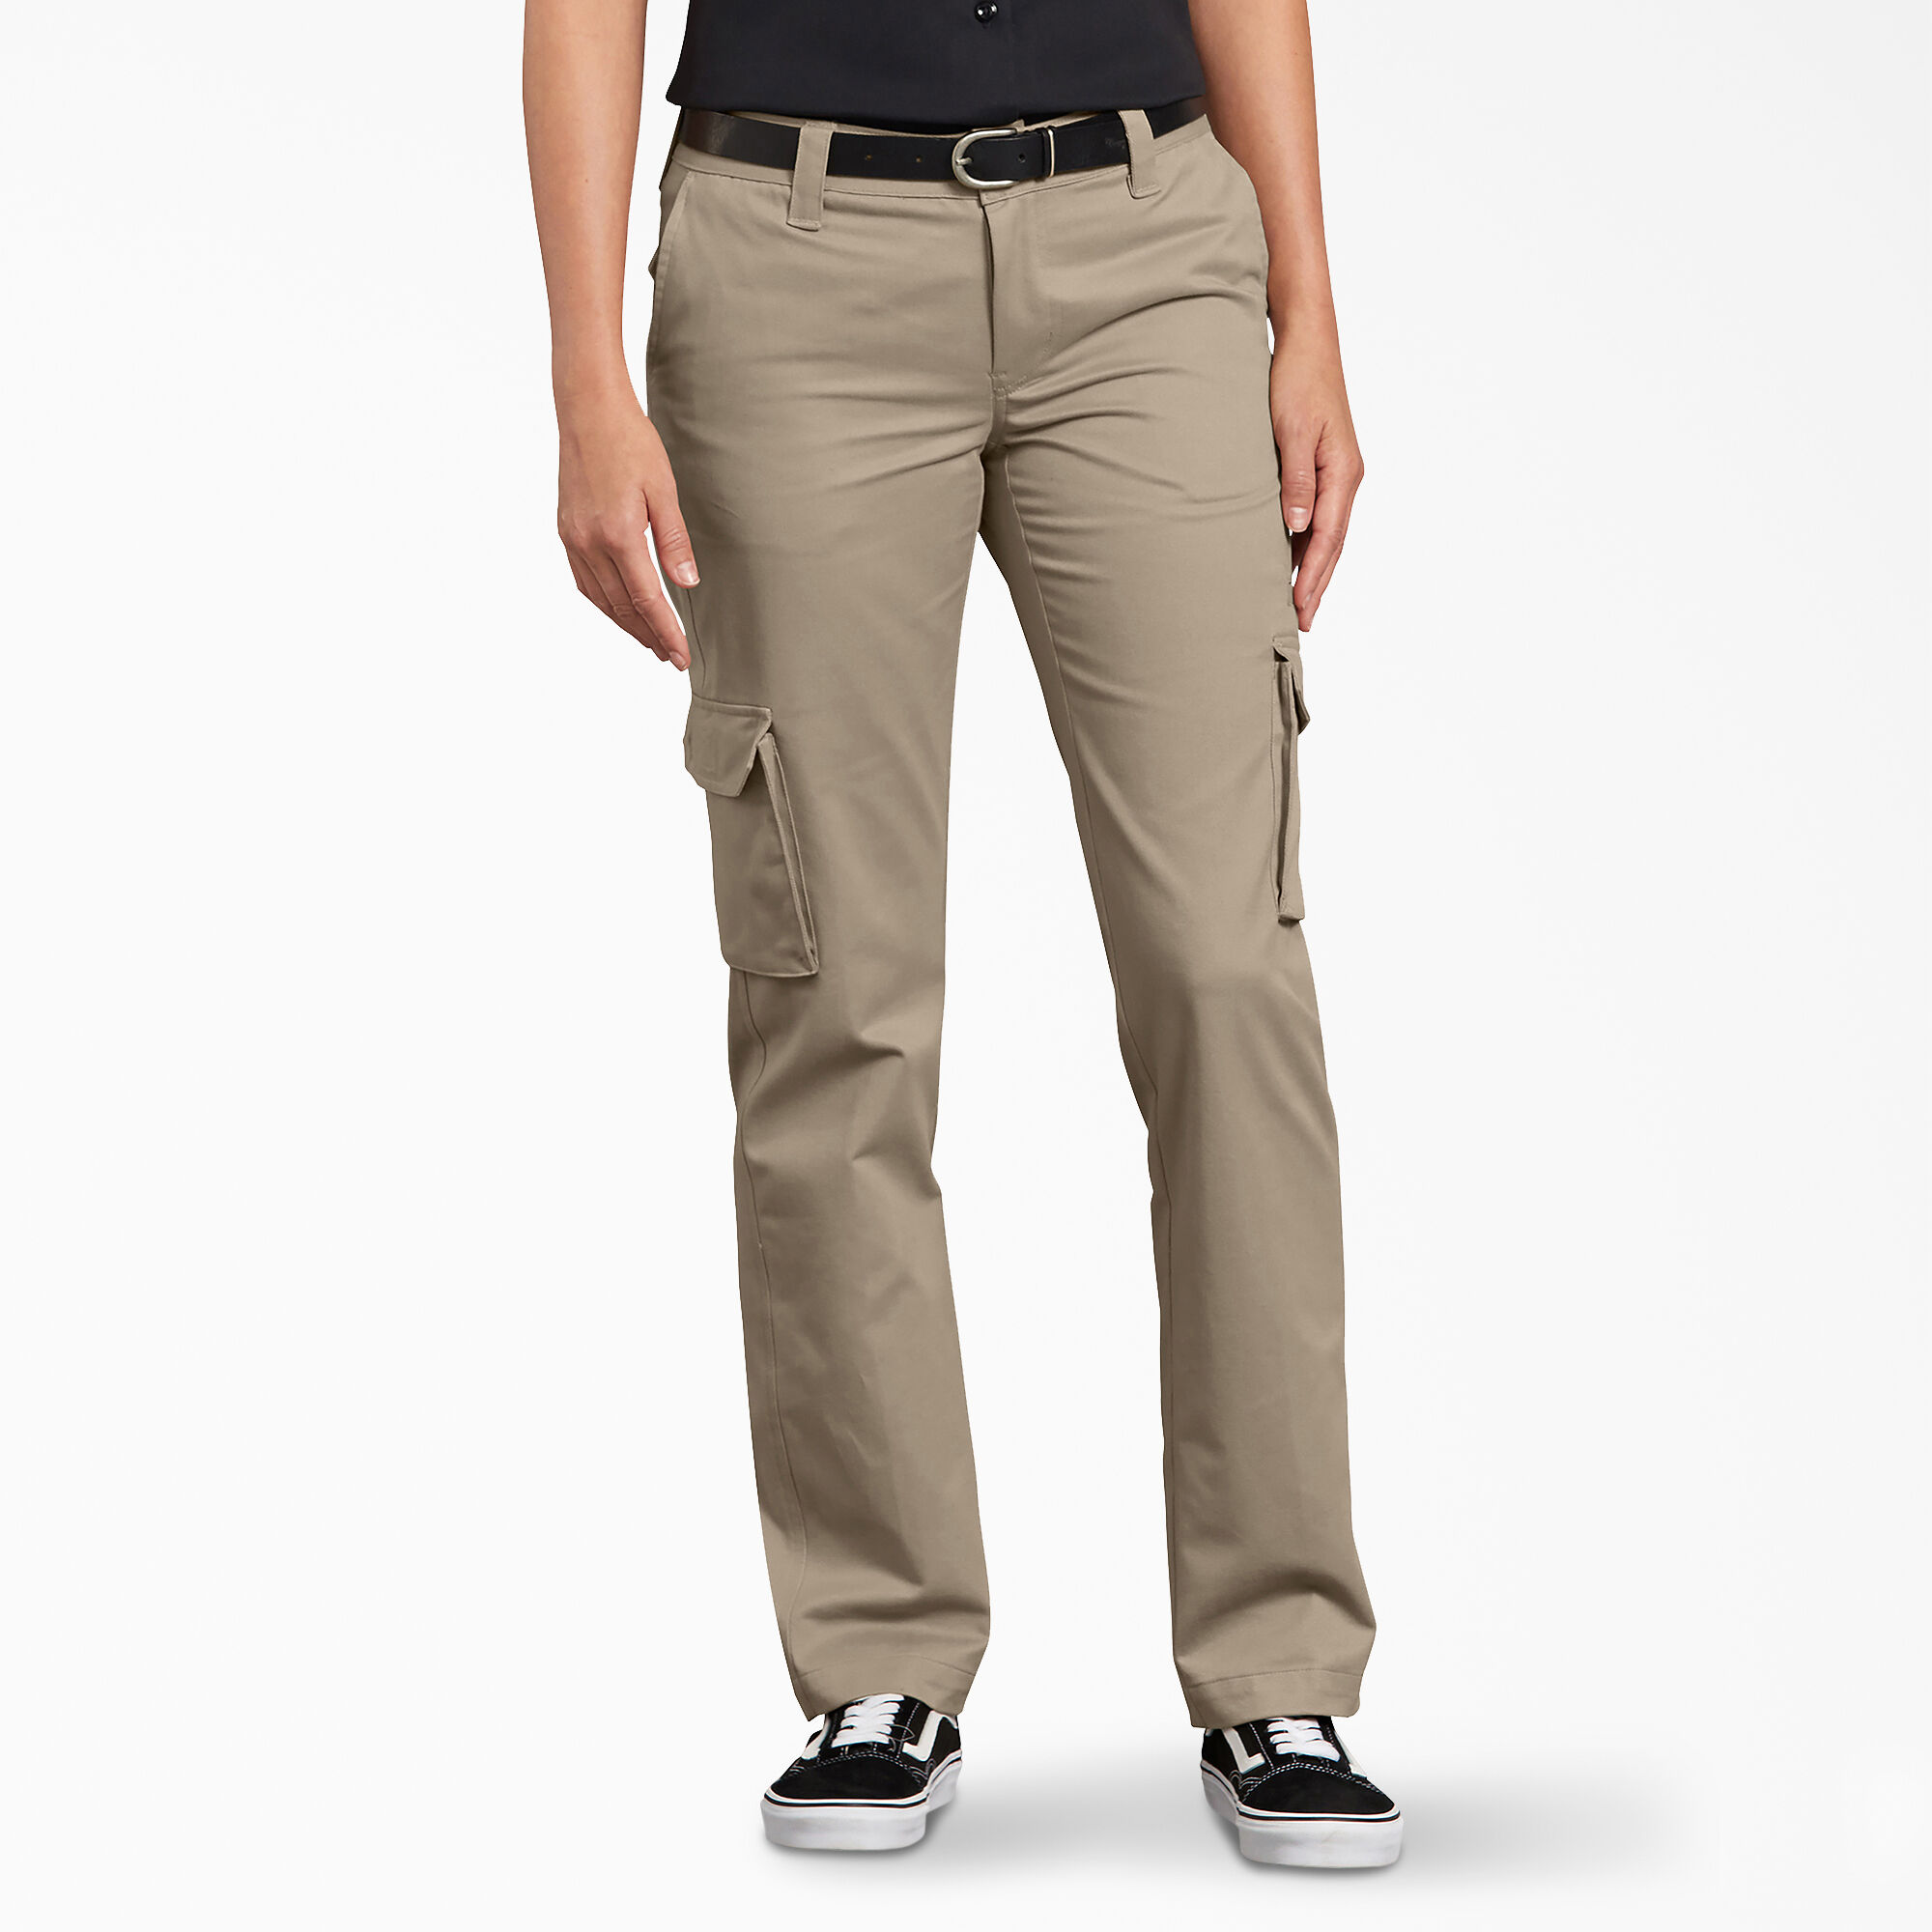 skinny fit cargo trouser with zip pockets